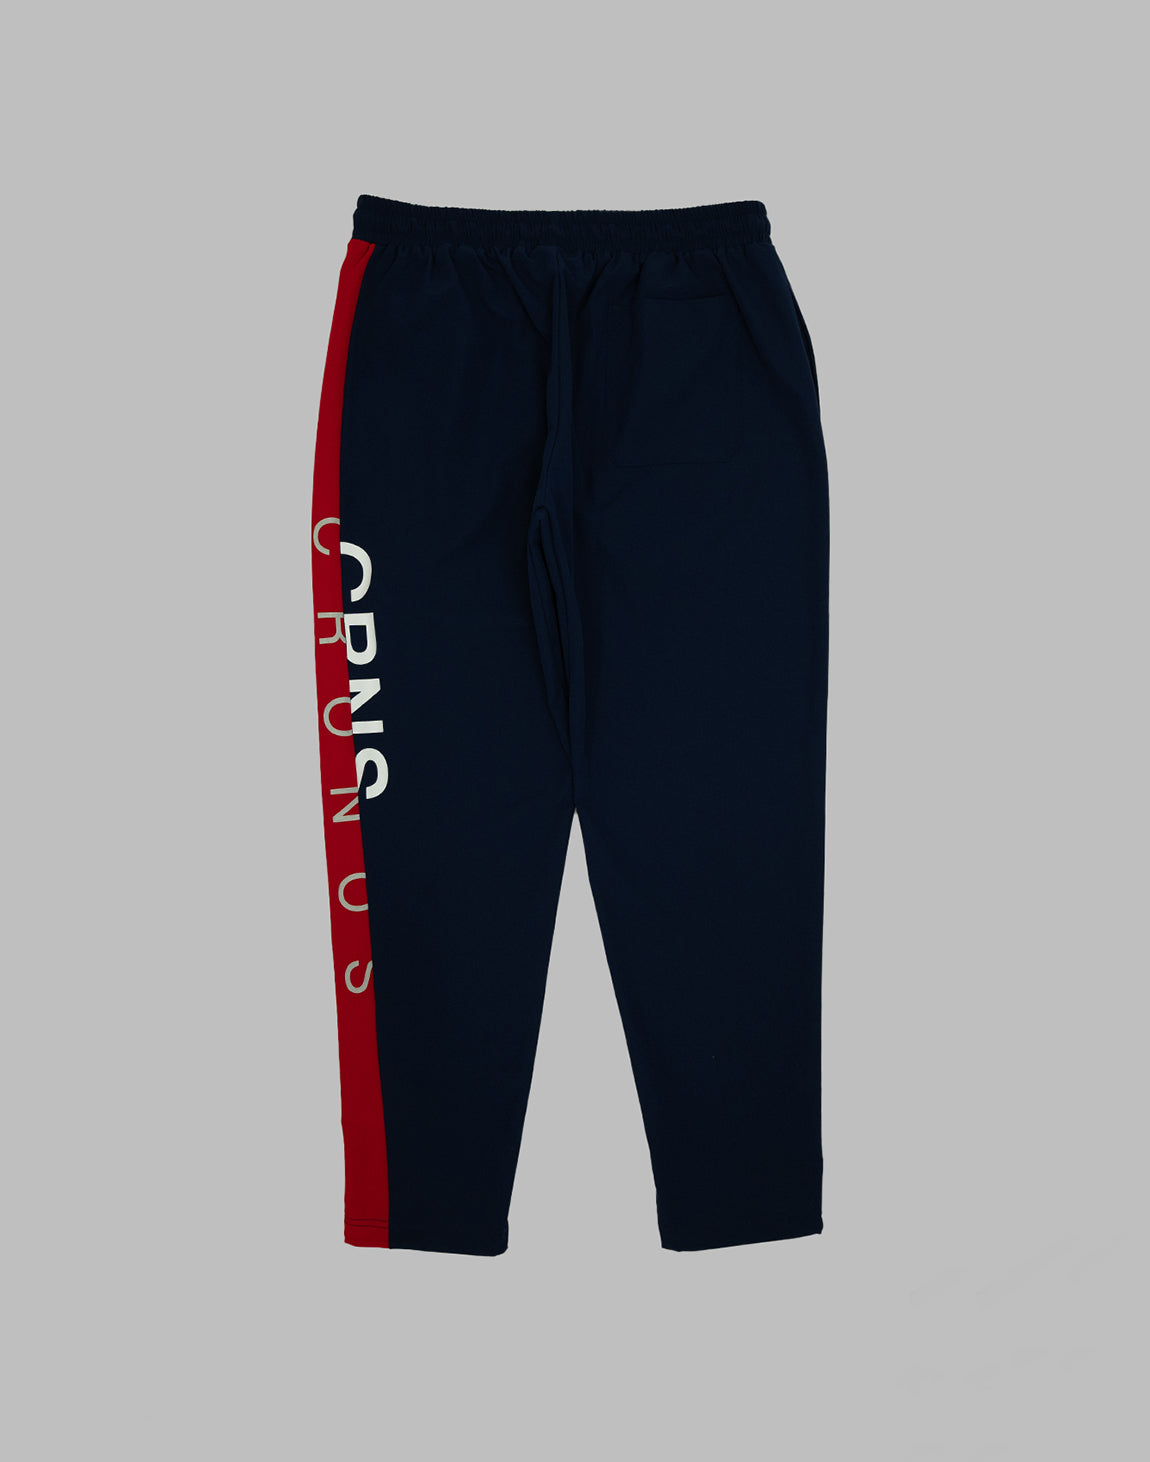 CRONOS CRNS COOL TOUCH LONGPANTS – クロノス CRONOS Official Store